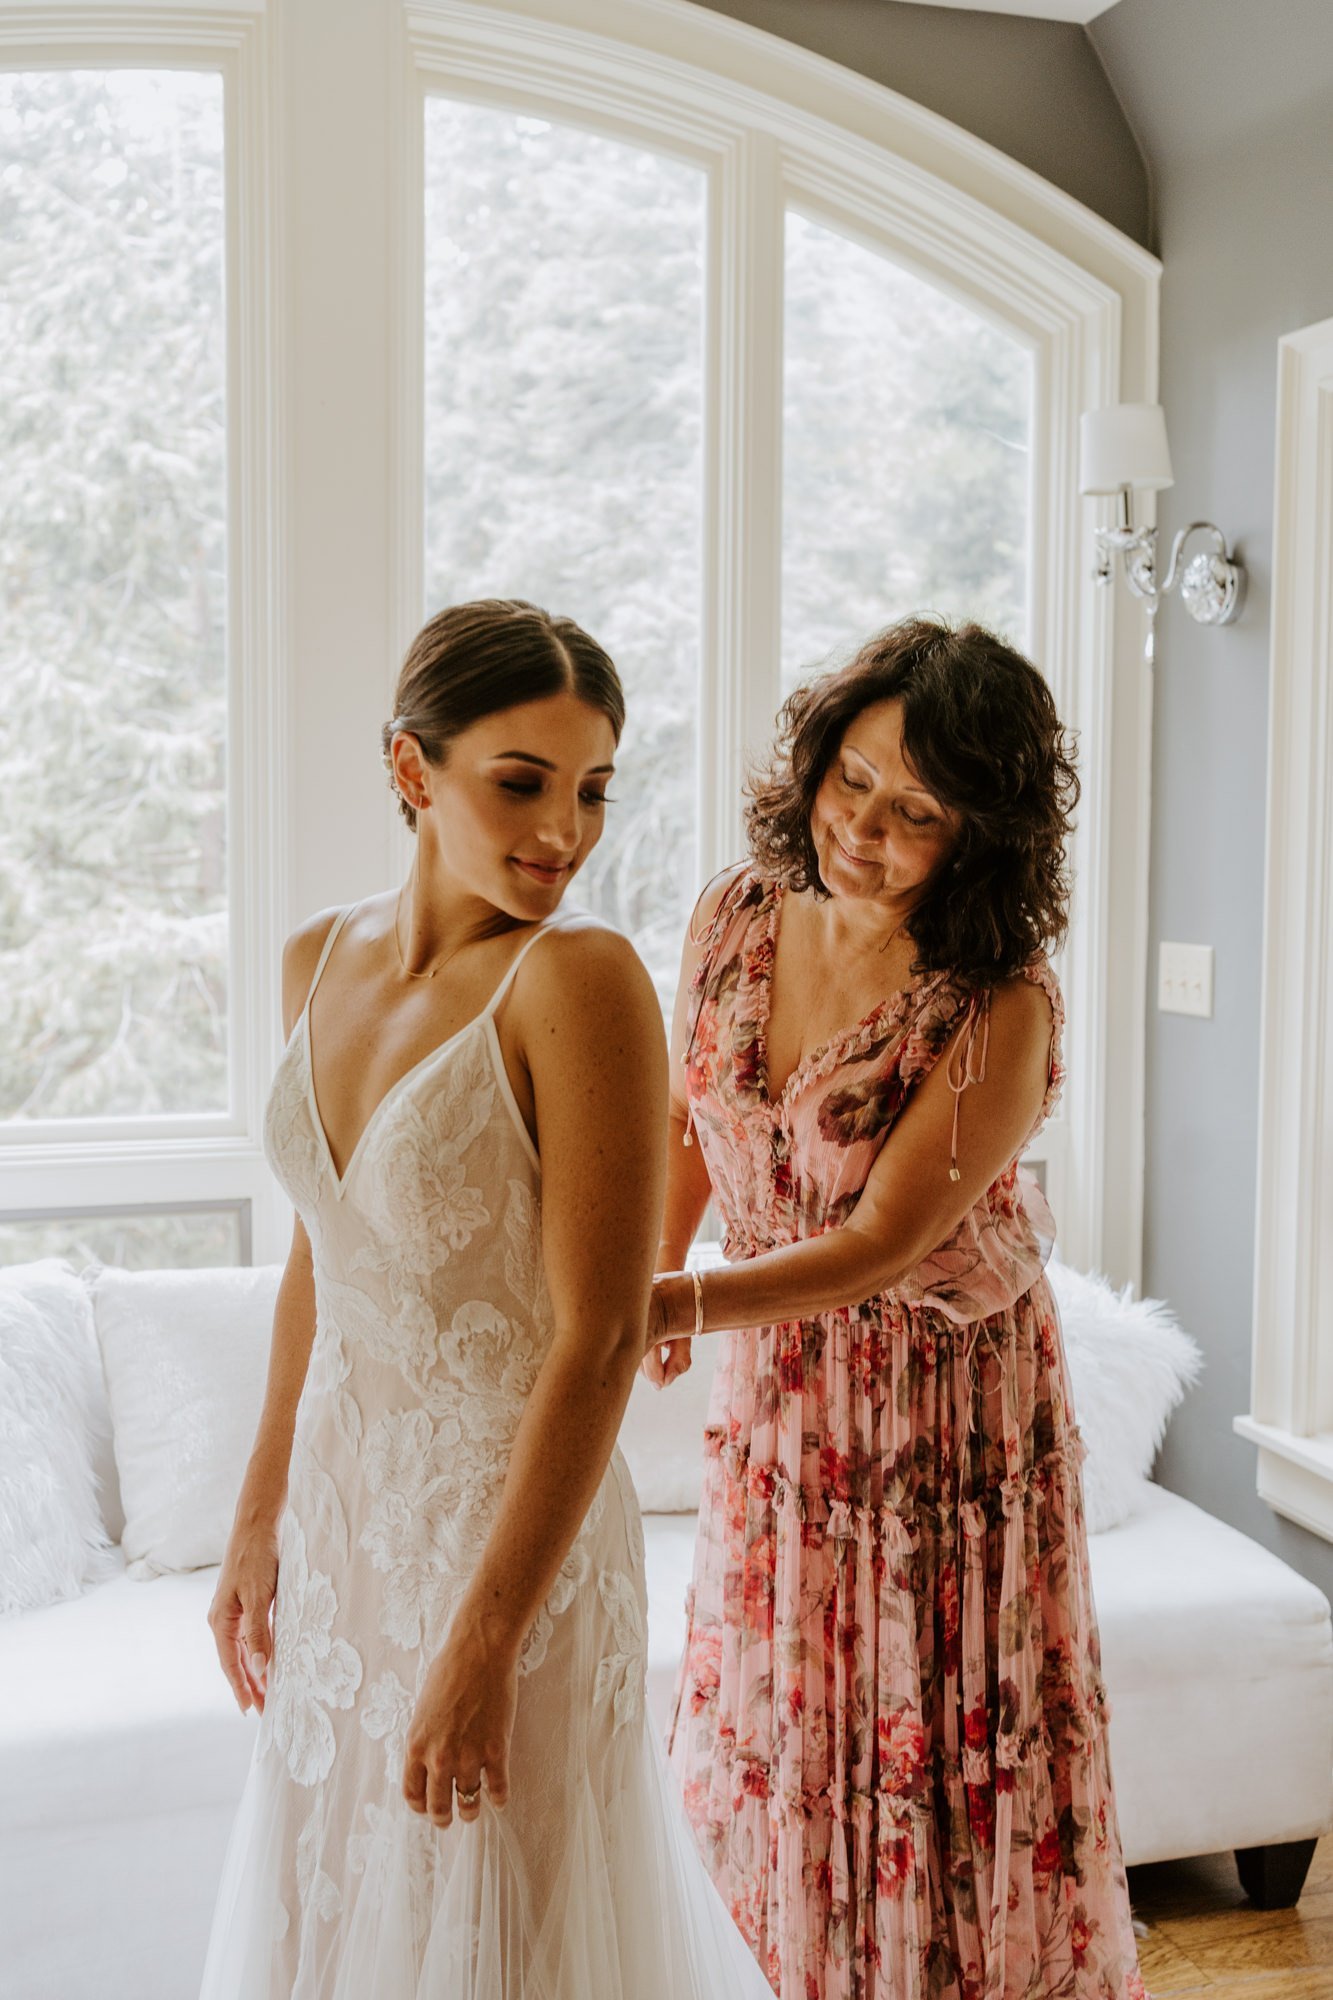 Bride and mother of the bride getting ready together in bridal suite, photo by Tida Svy Photography